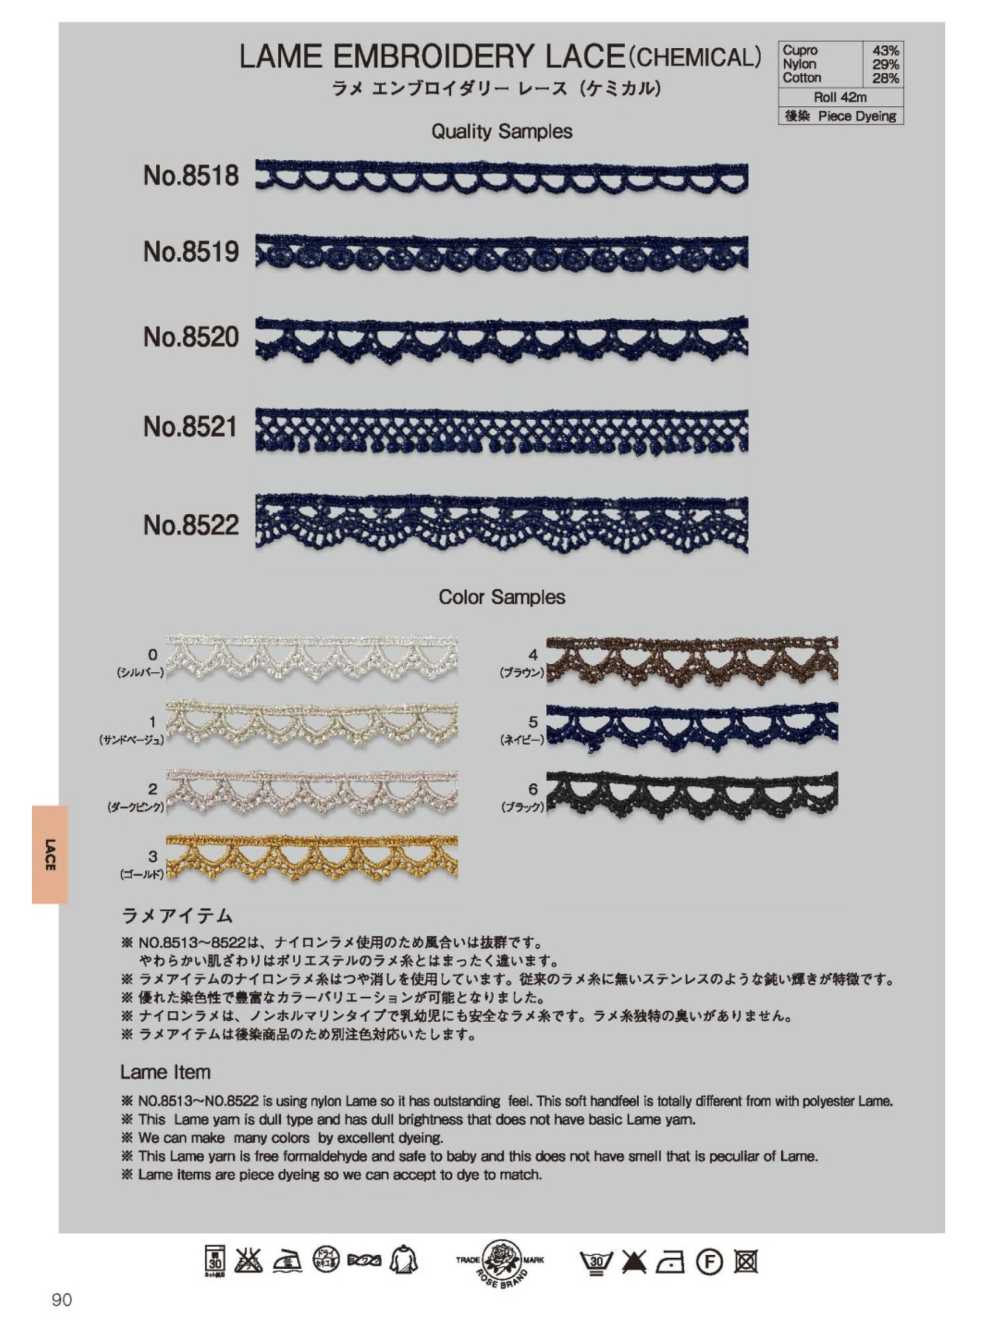 8520 Lame Embroidered Lace(Chemical) ROSE BRAND (Marushin)